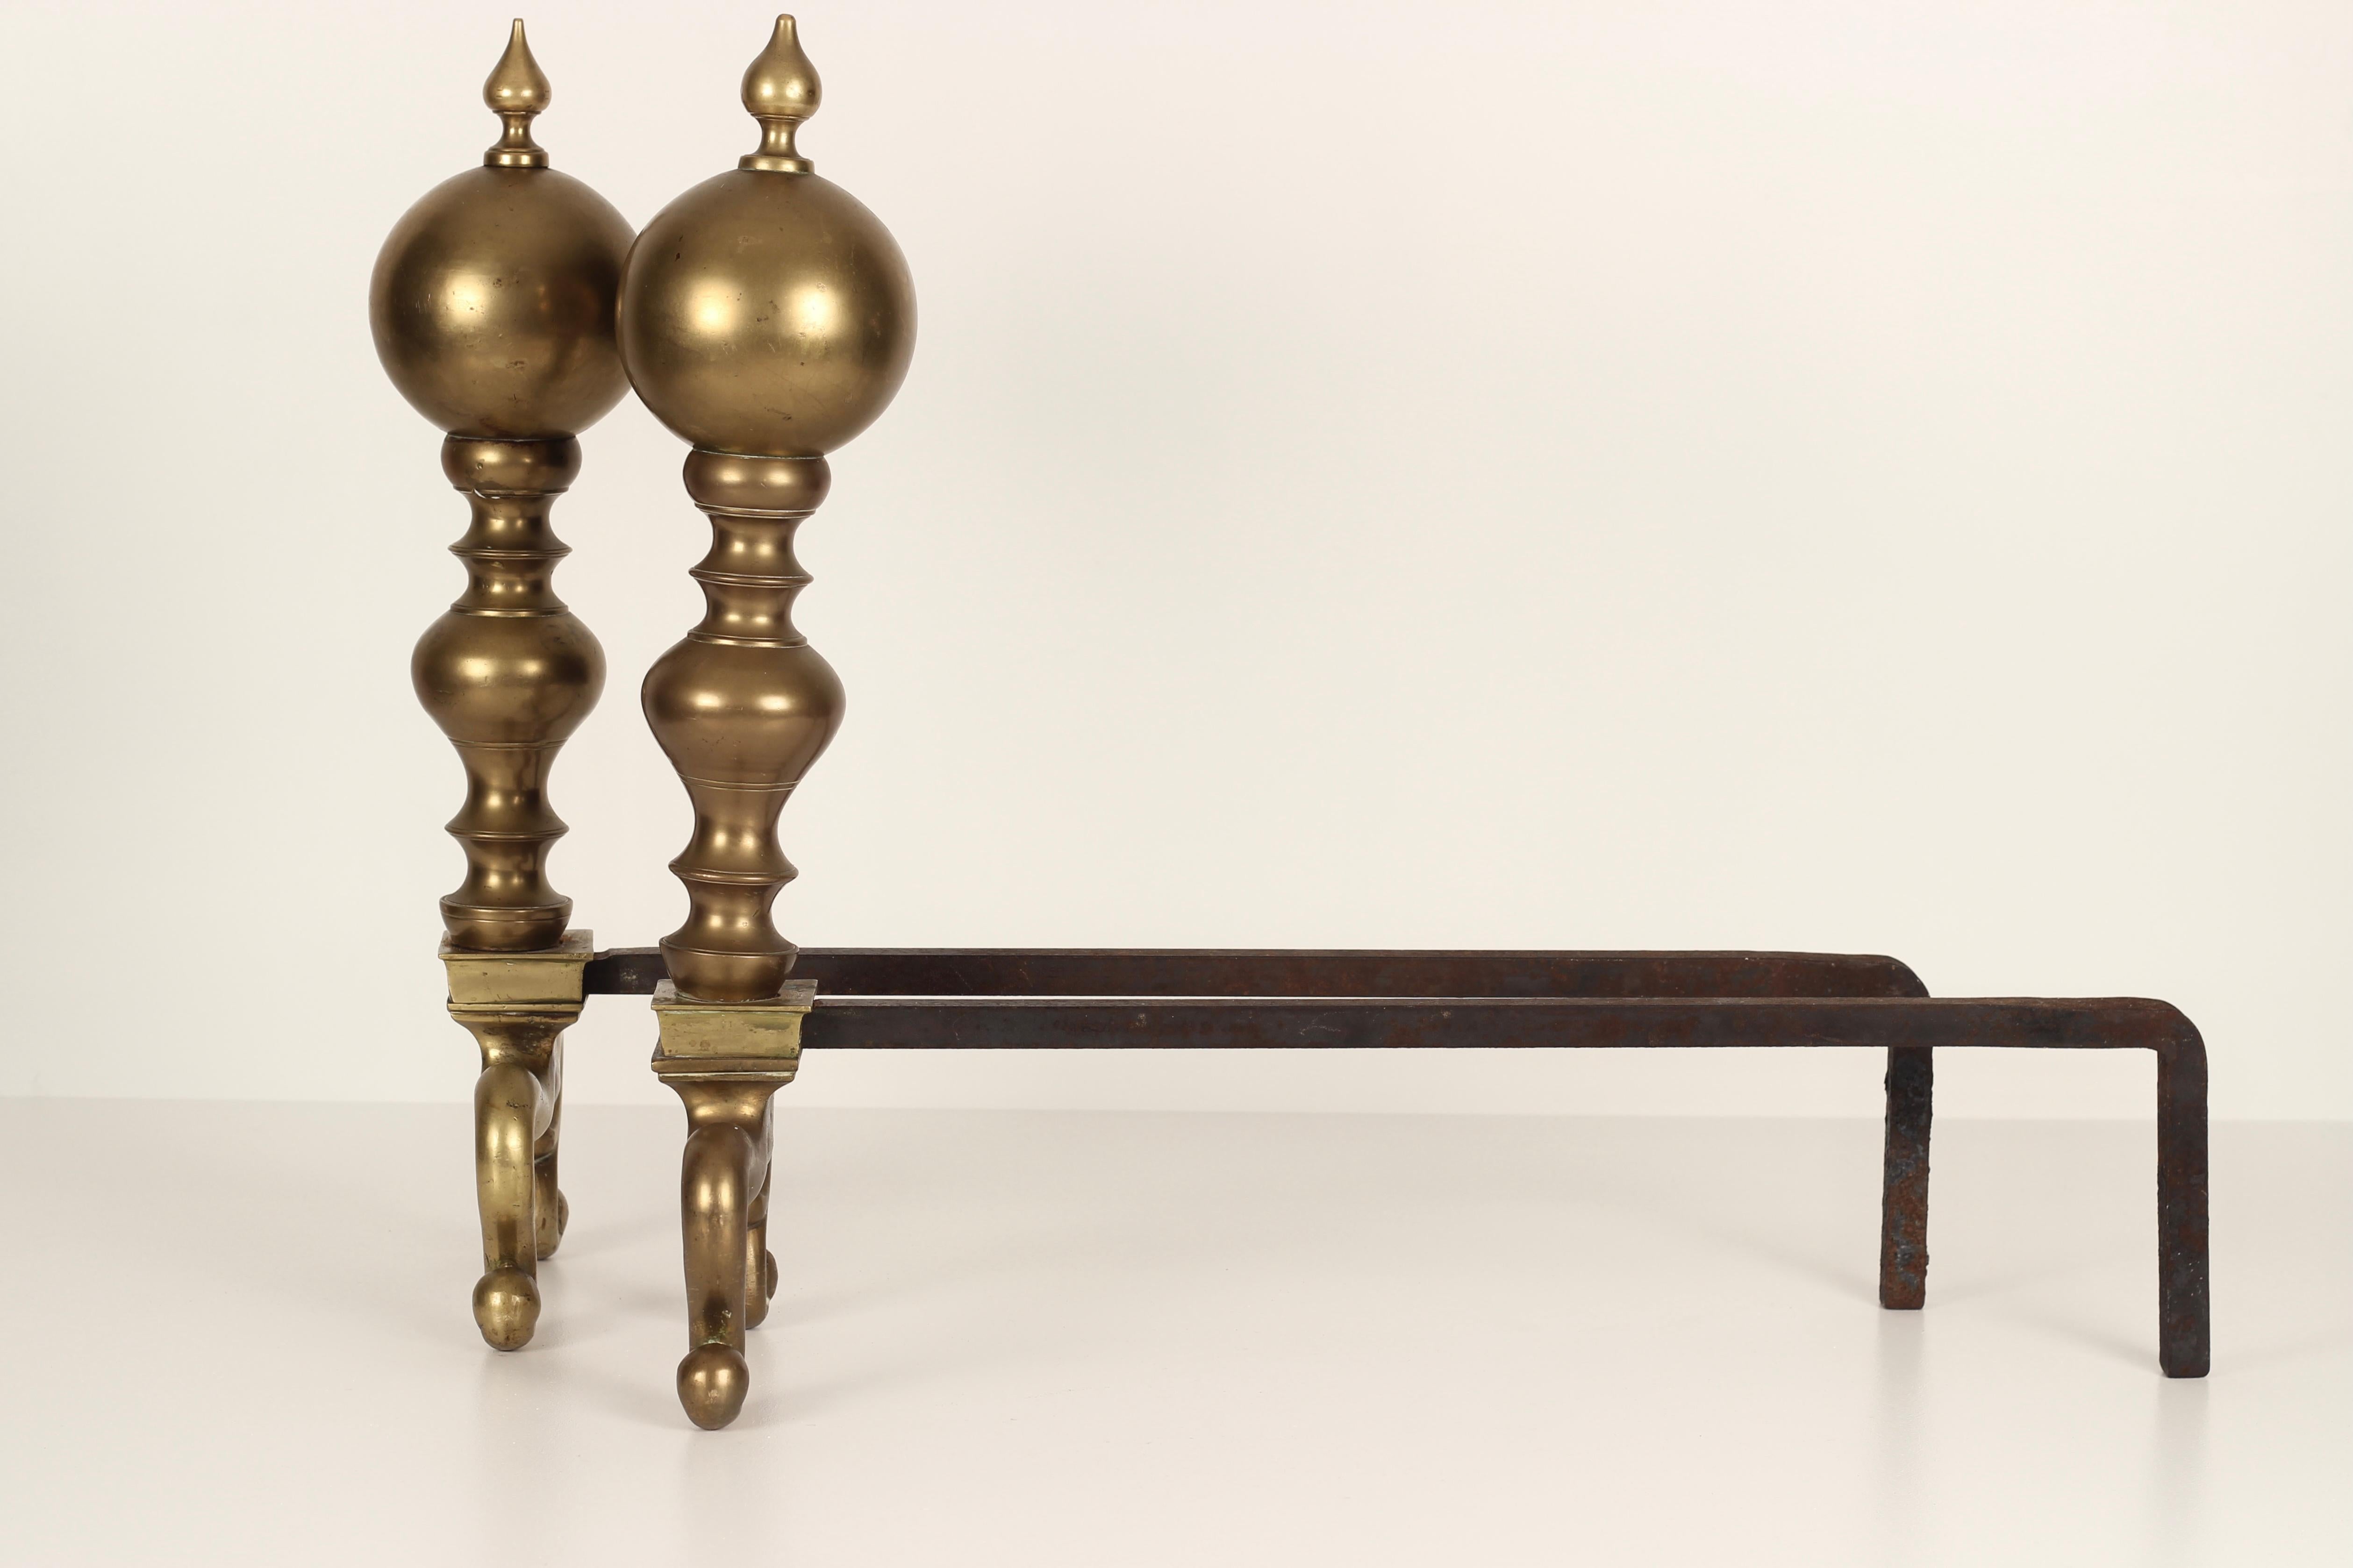 A pair of Victorian late 19th century, early 20th century brass fire irons or Andirons, possibly produced around the time of the Aesthetic Movement with influences from Persia. 

Andirons and fire dogs are devices made of metal and (rarely)